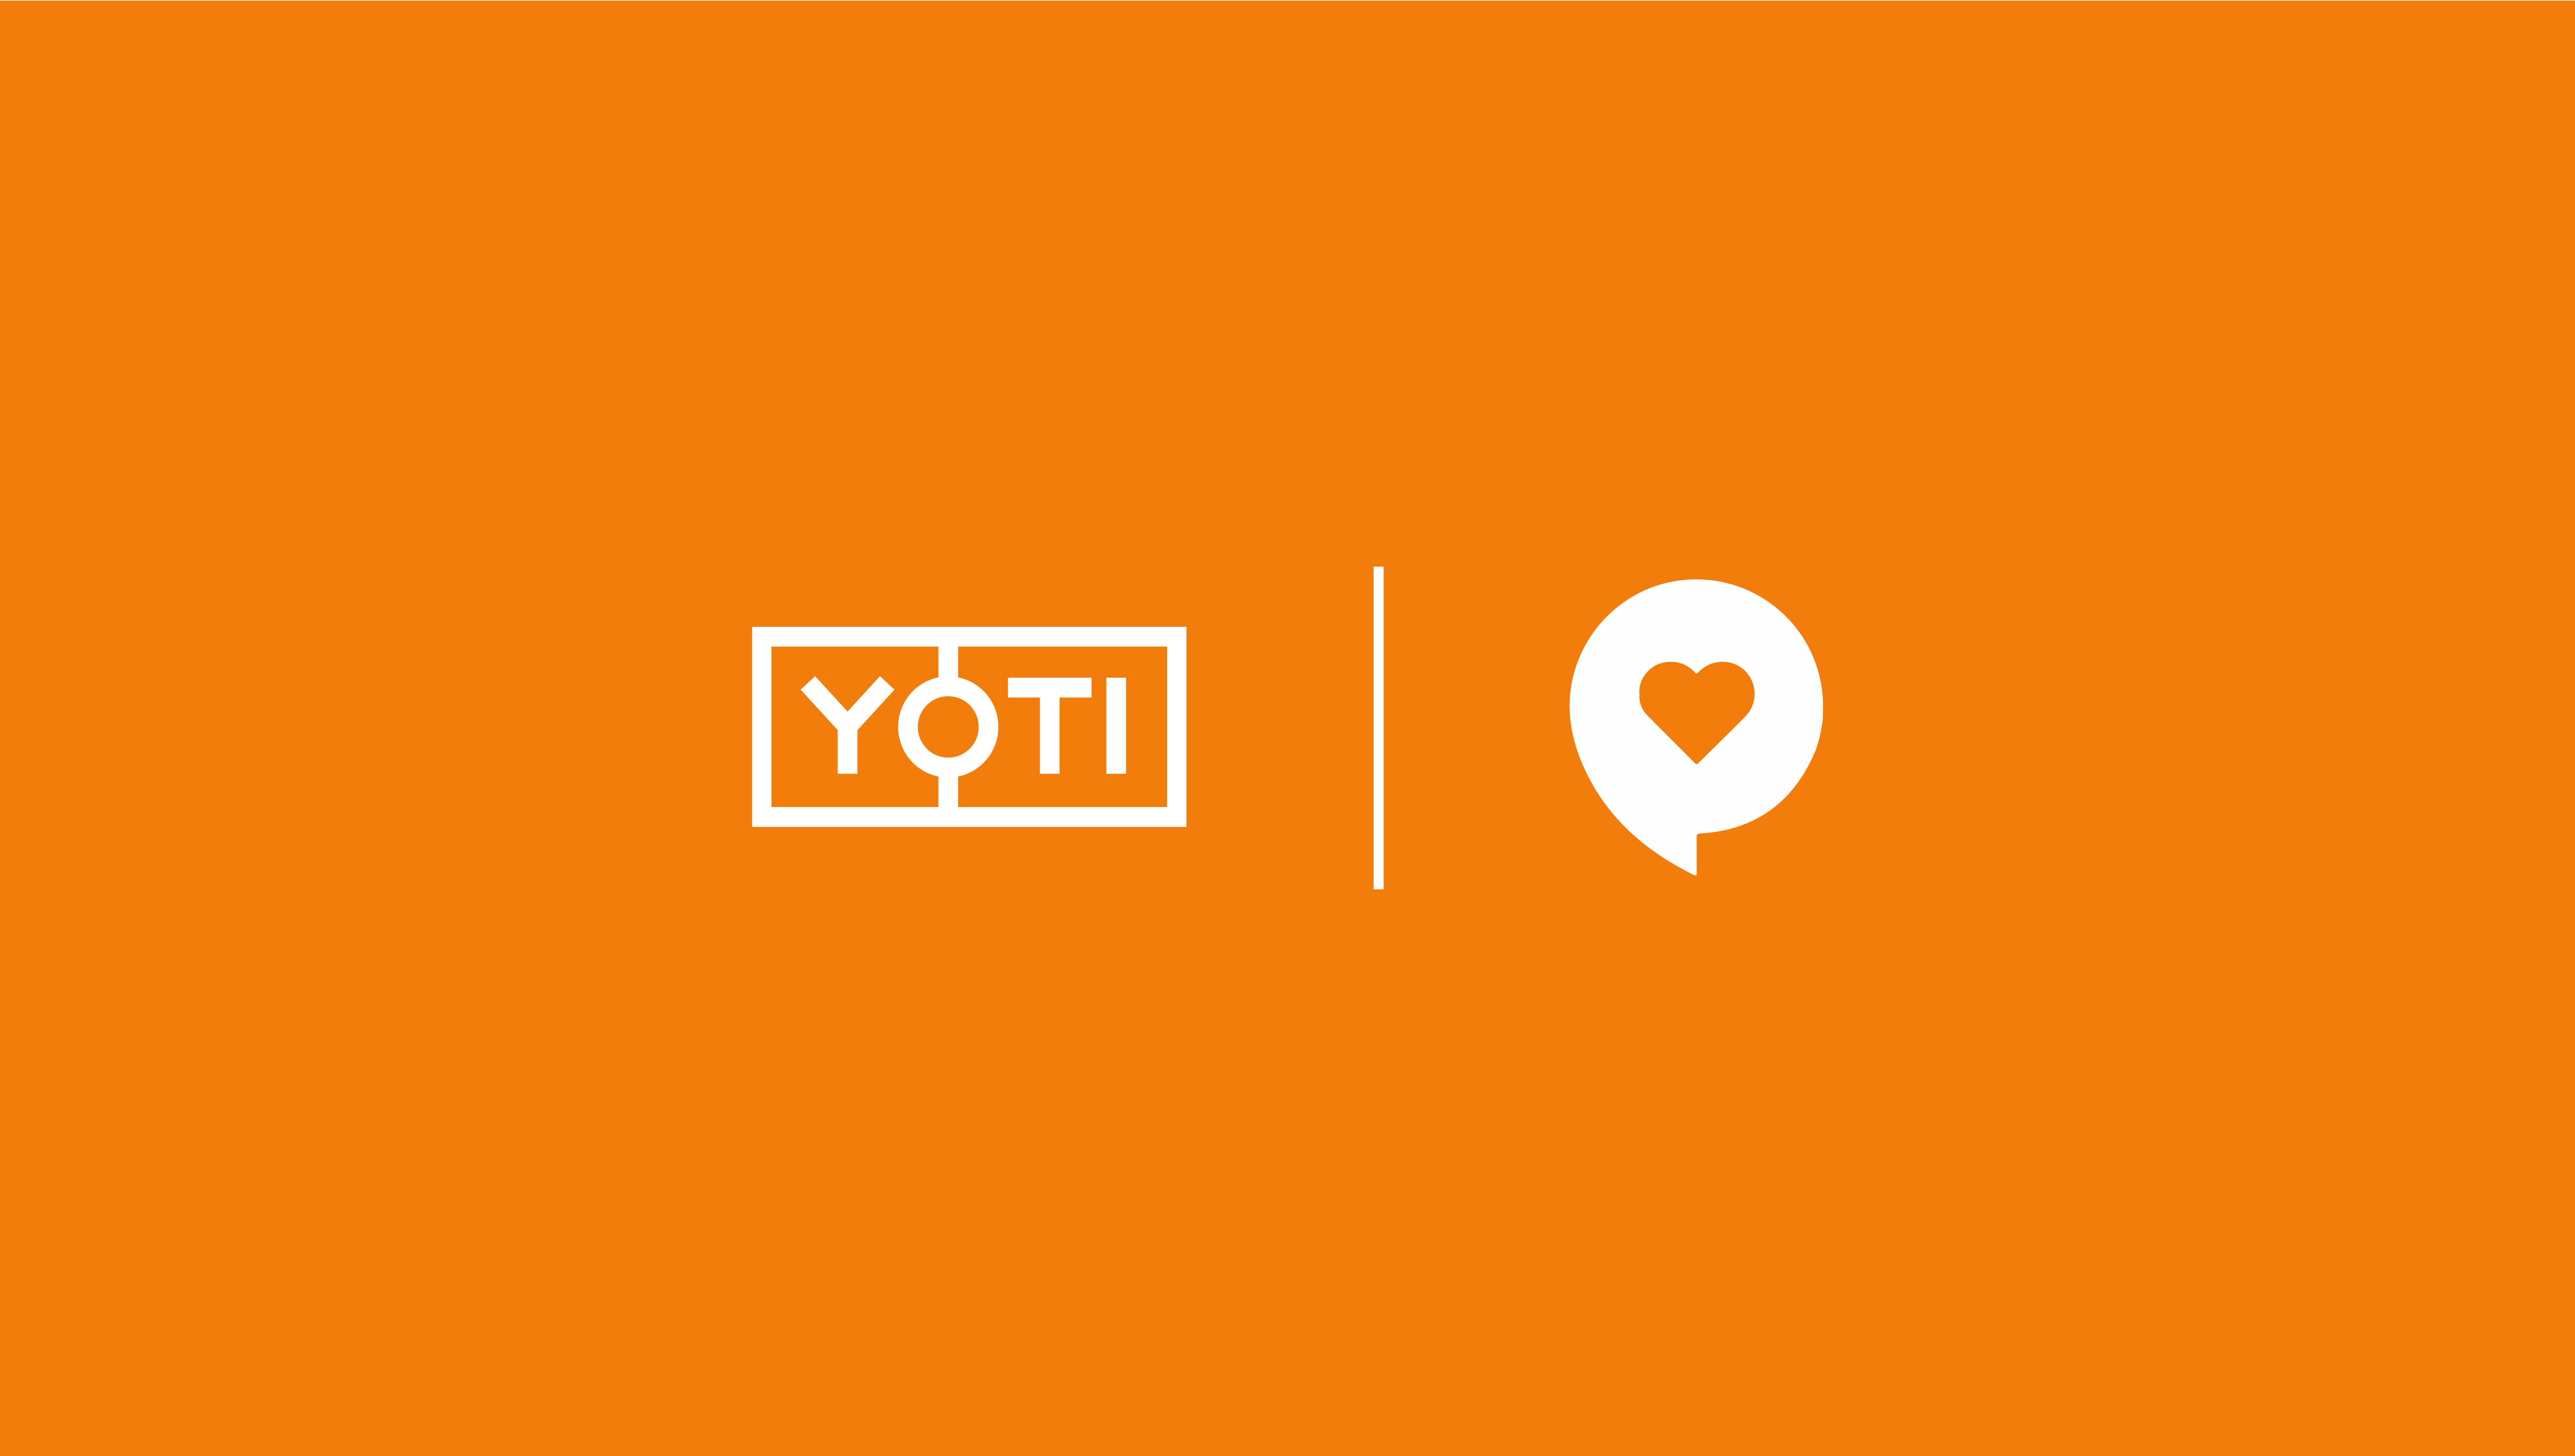 Yoti and Preloved logos presented together